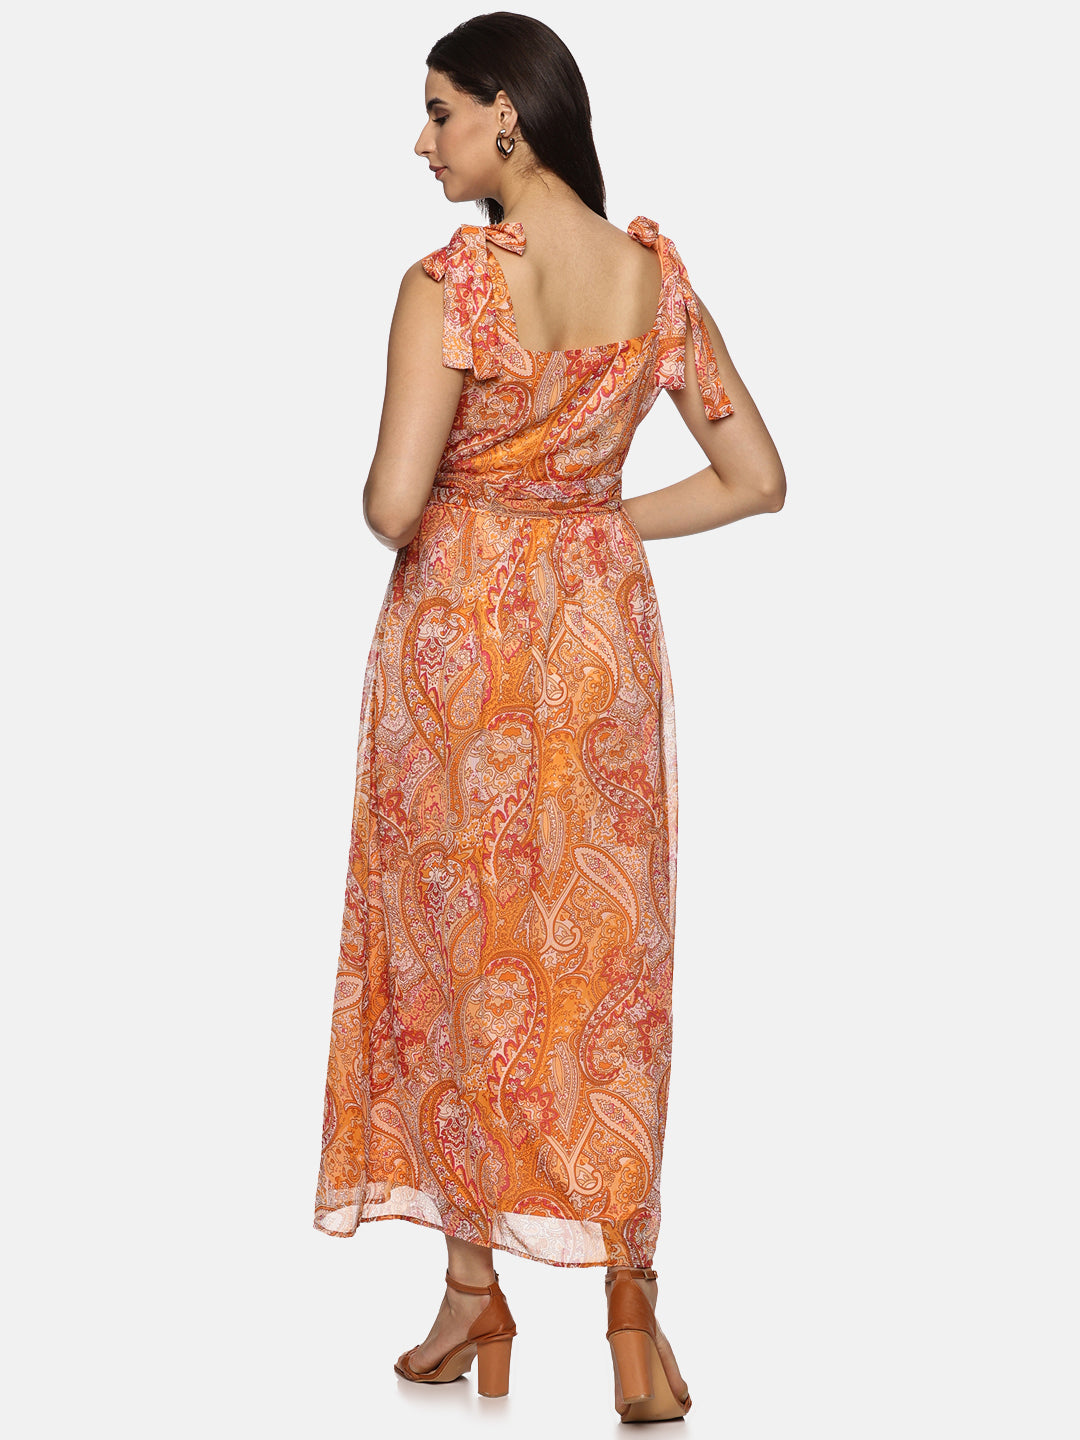 Buy Printed Floral Chiffon Fabric | Tie-up Detailed Maxi Dress Online In India